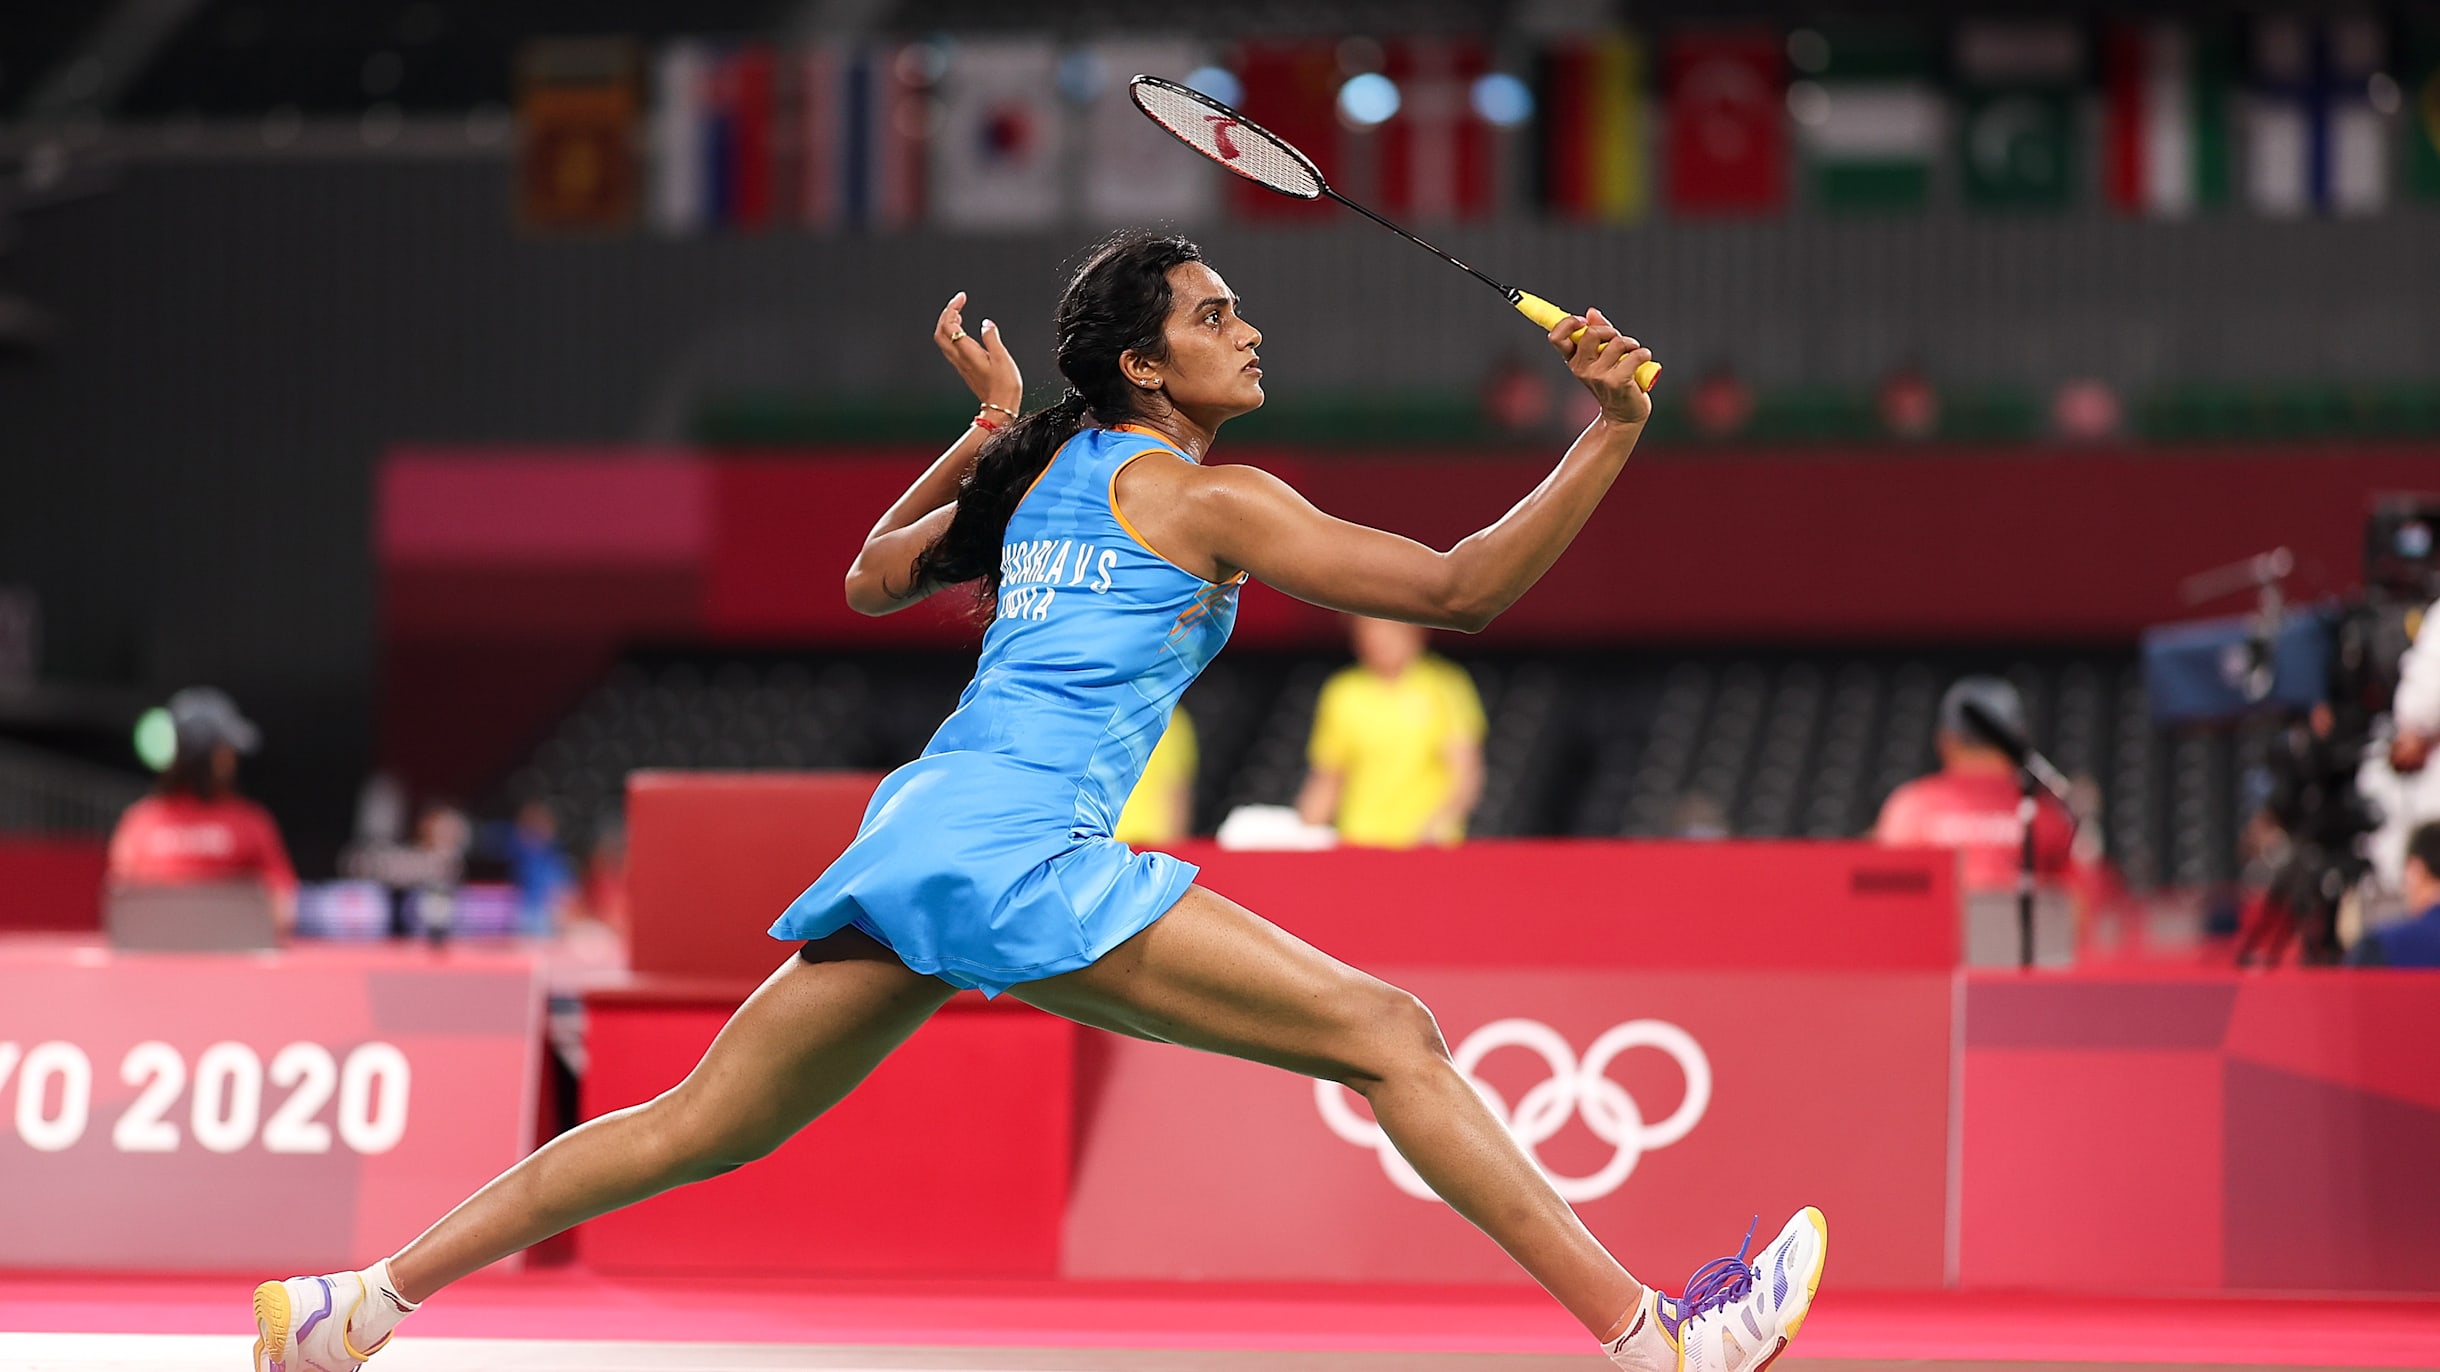 BWF World Championships 2021 PV Sindhu to play, watch live streaming and telecast in India